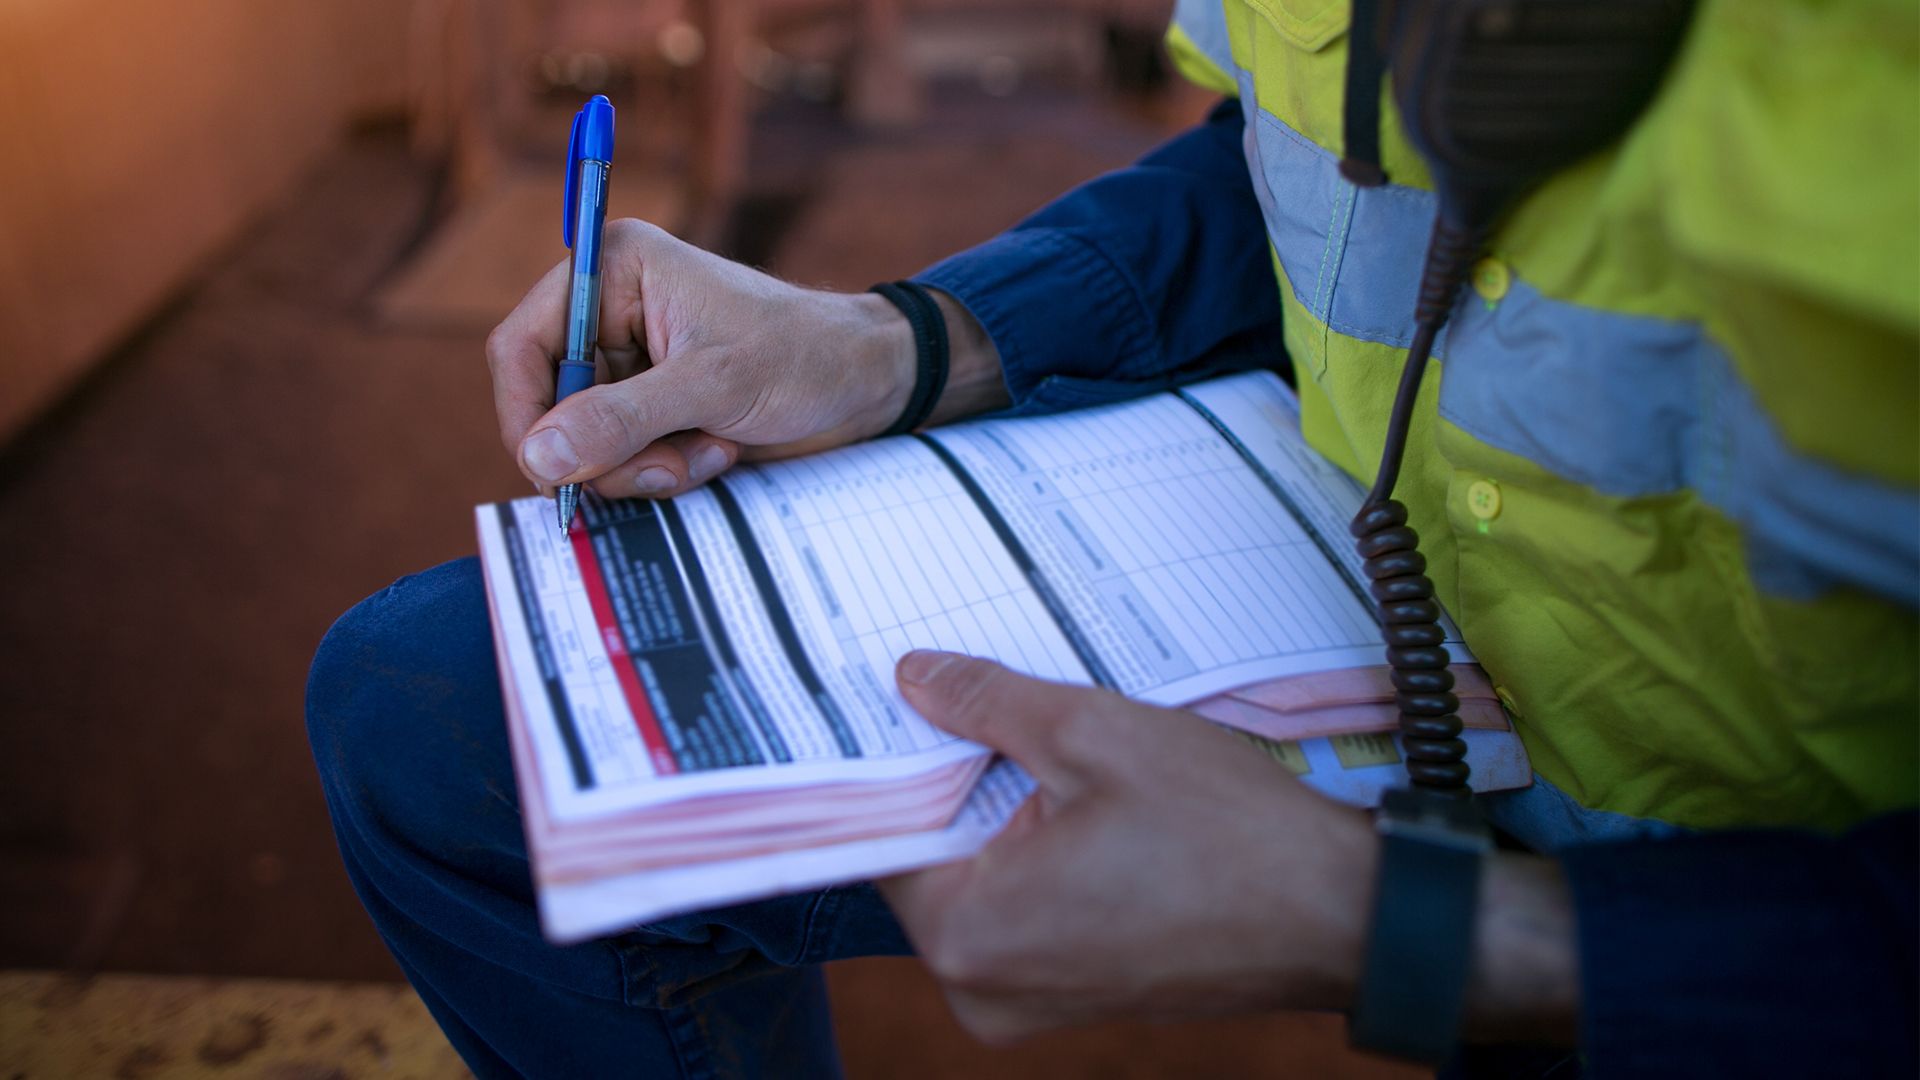 Construction worker filling out a safety audit